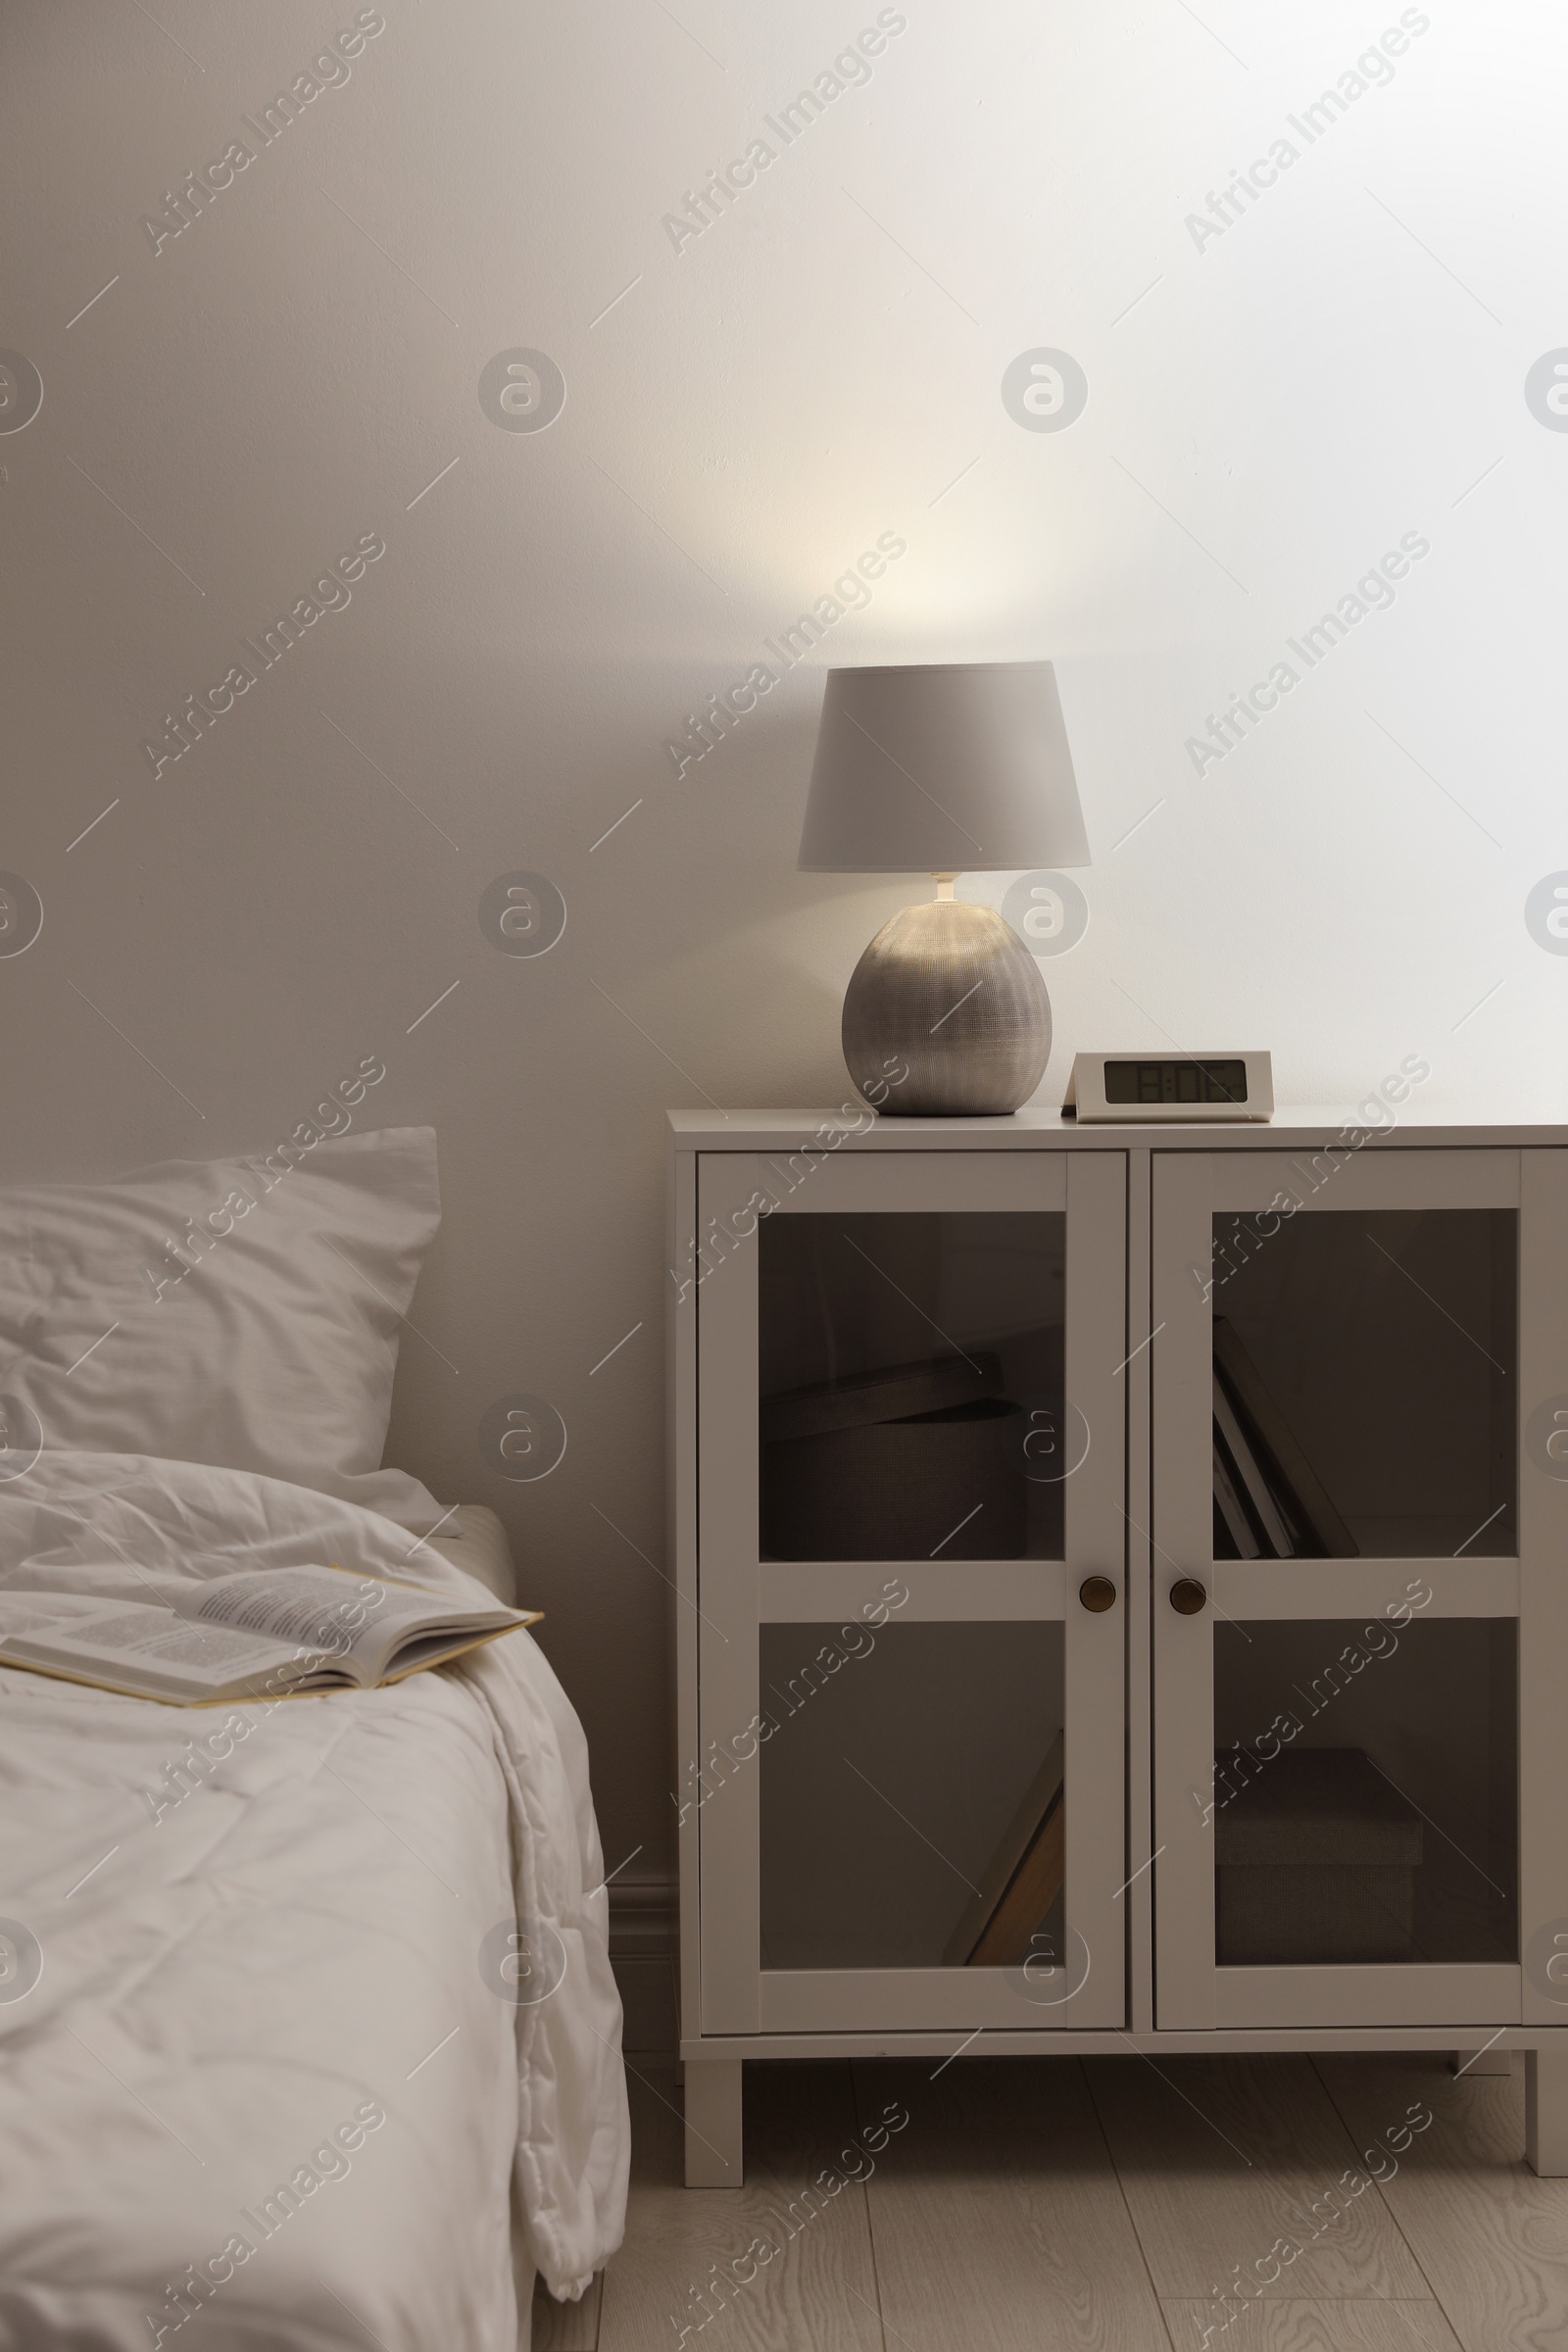 Photo of Stylish lamp and alarm clock on bedside table indoors. Bedroom interior elements